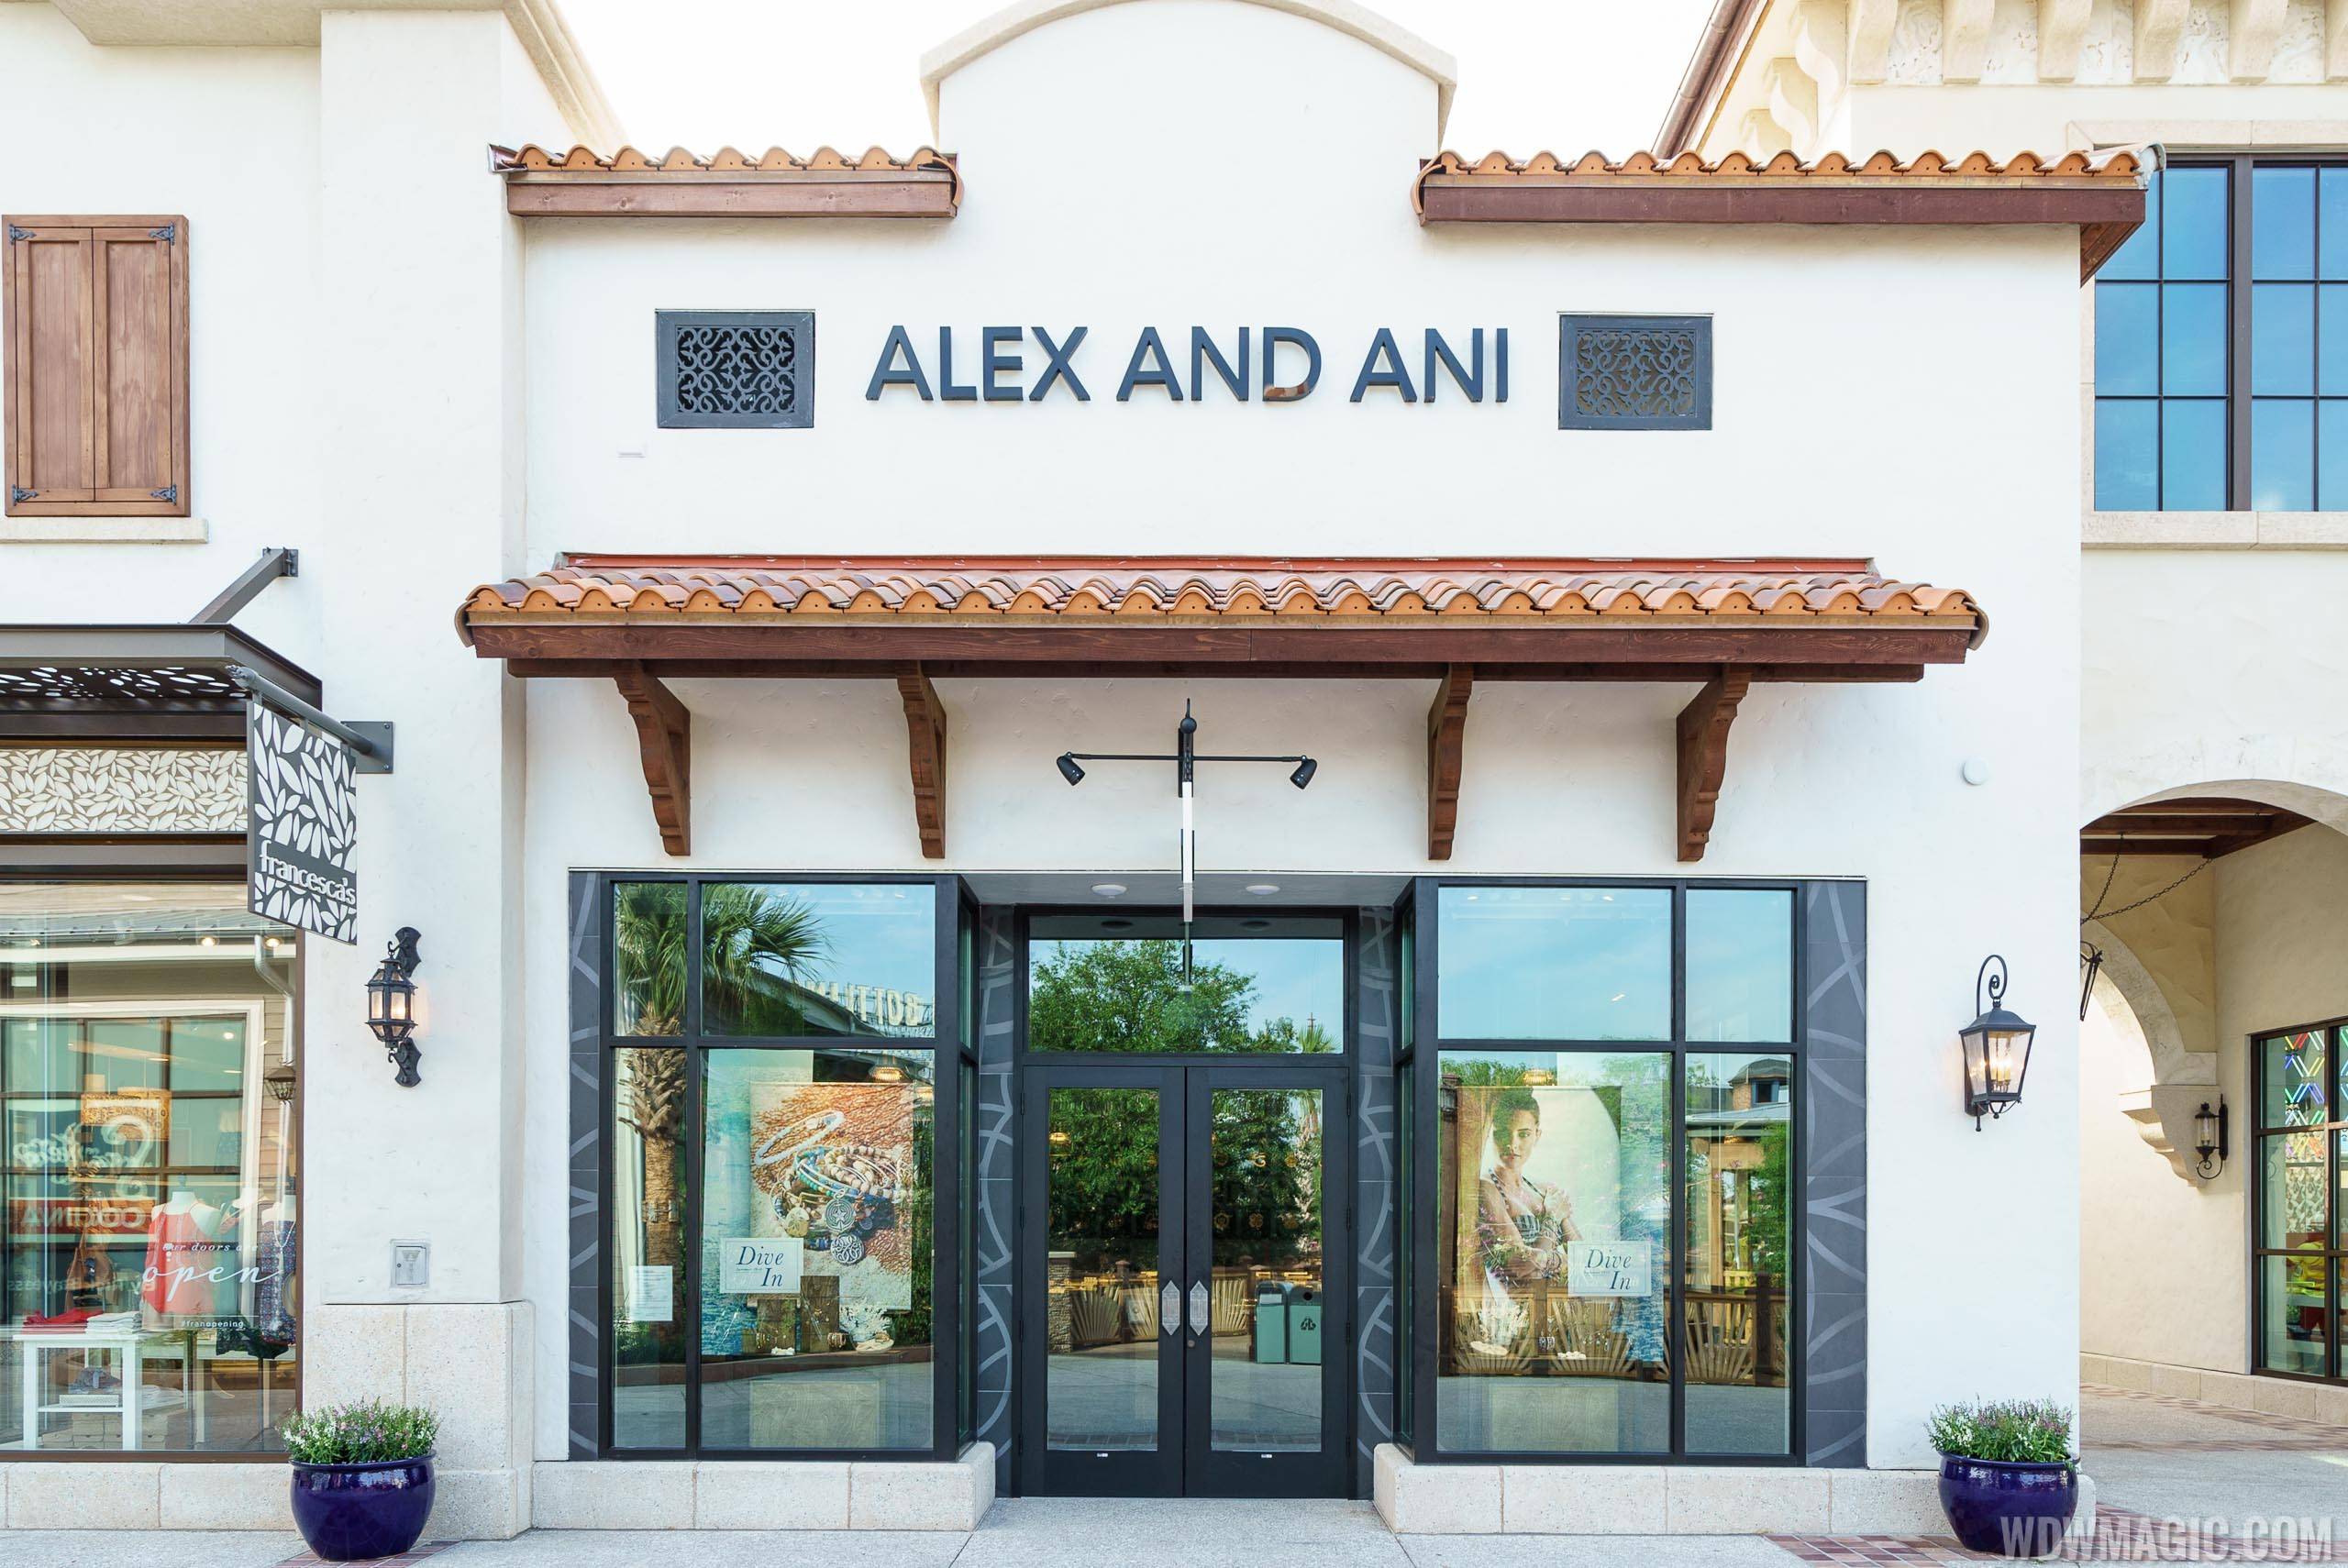 ALEX AND ANI moving to a new location at Disney Springs